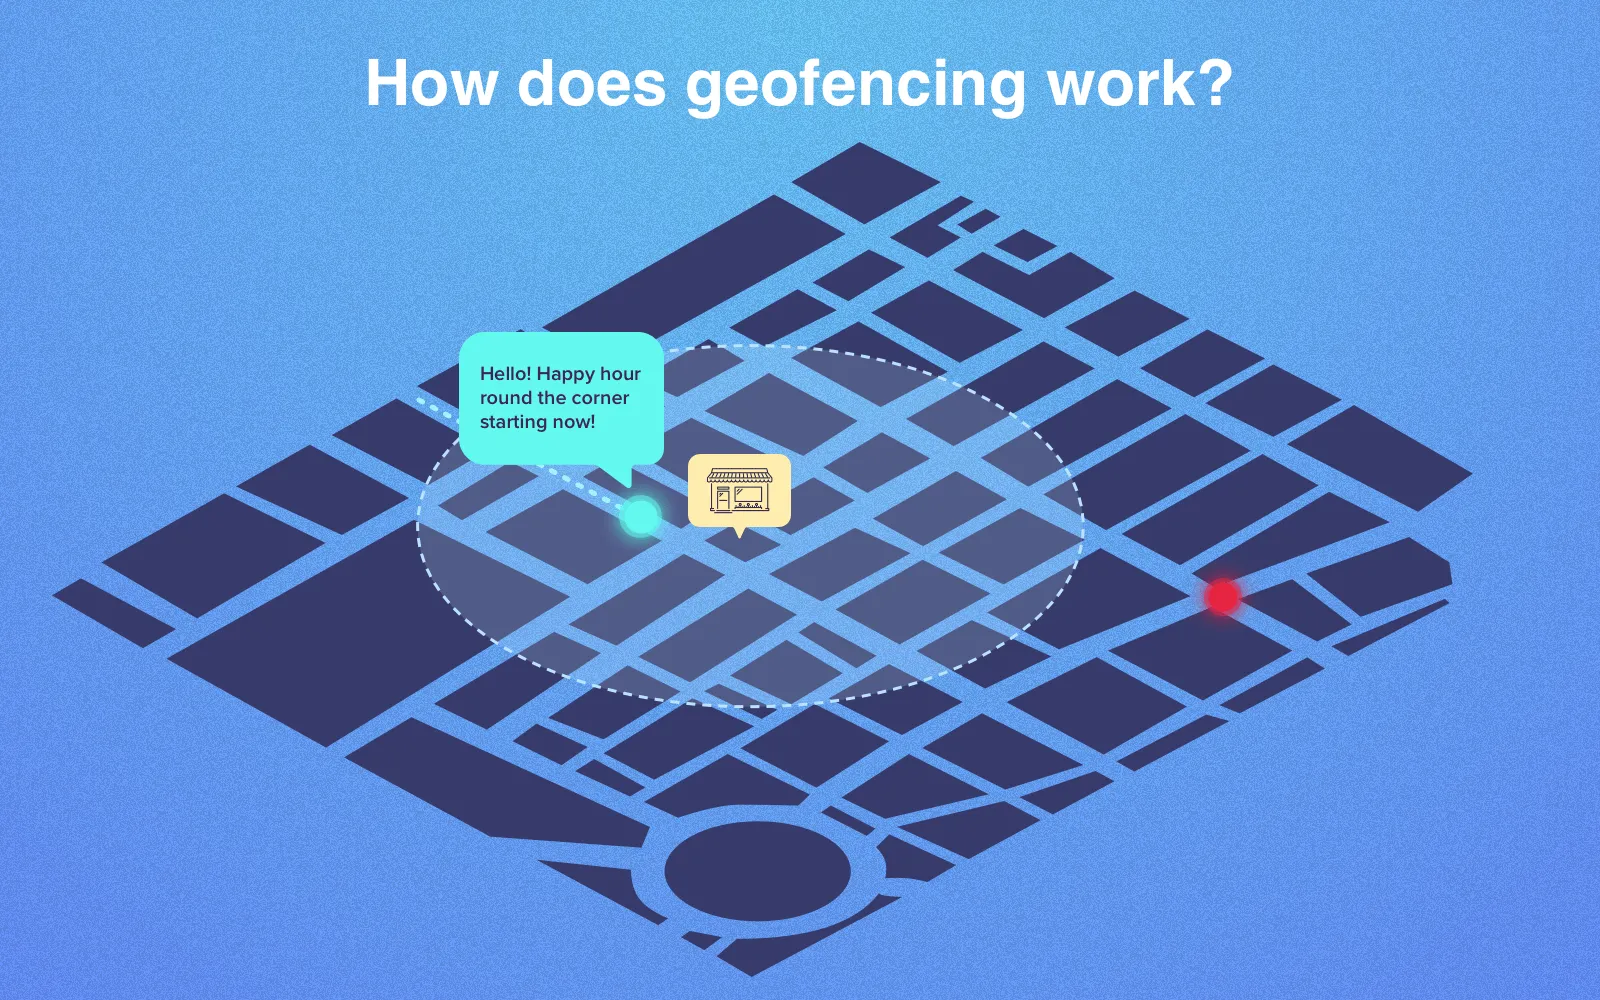 The principles of geofencing work